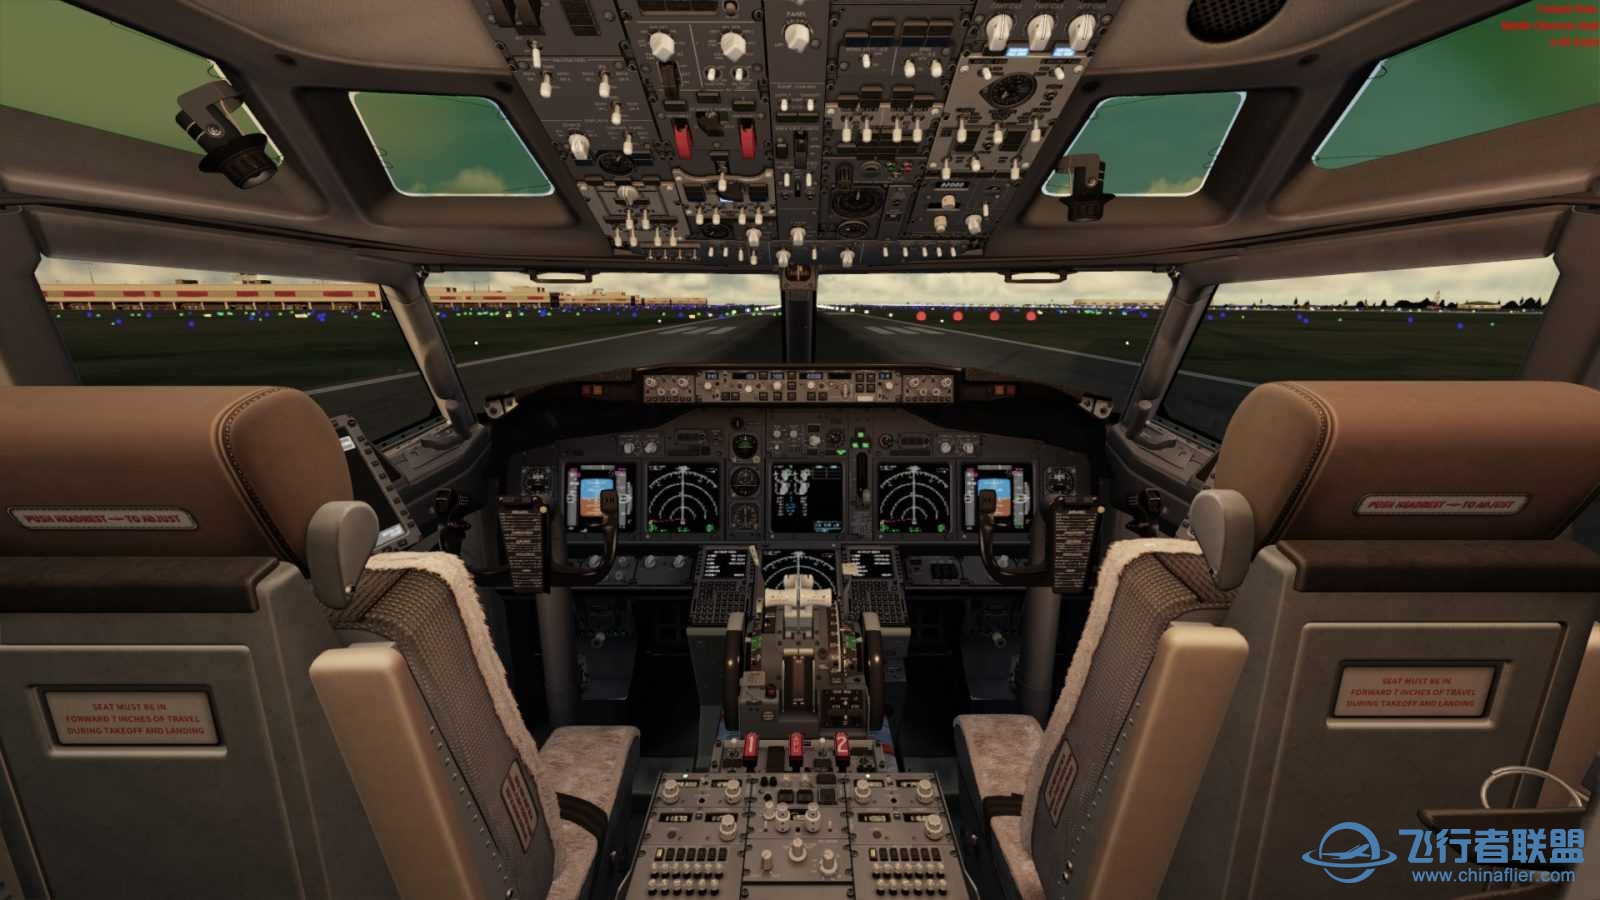 ifly-jets-advanced-series-737ng-release-candidate-p3d-02-1600x900.jpg